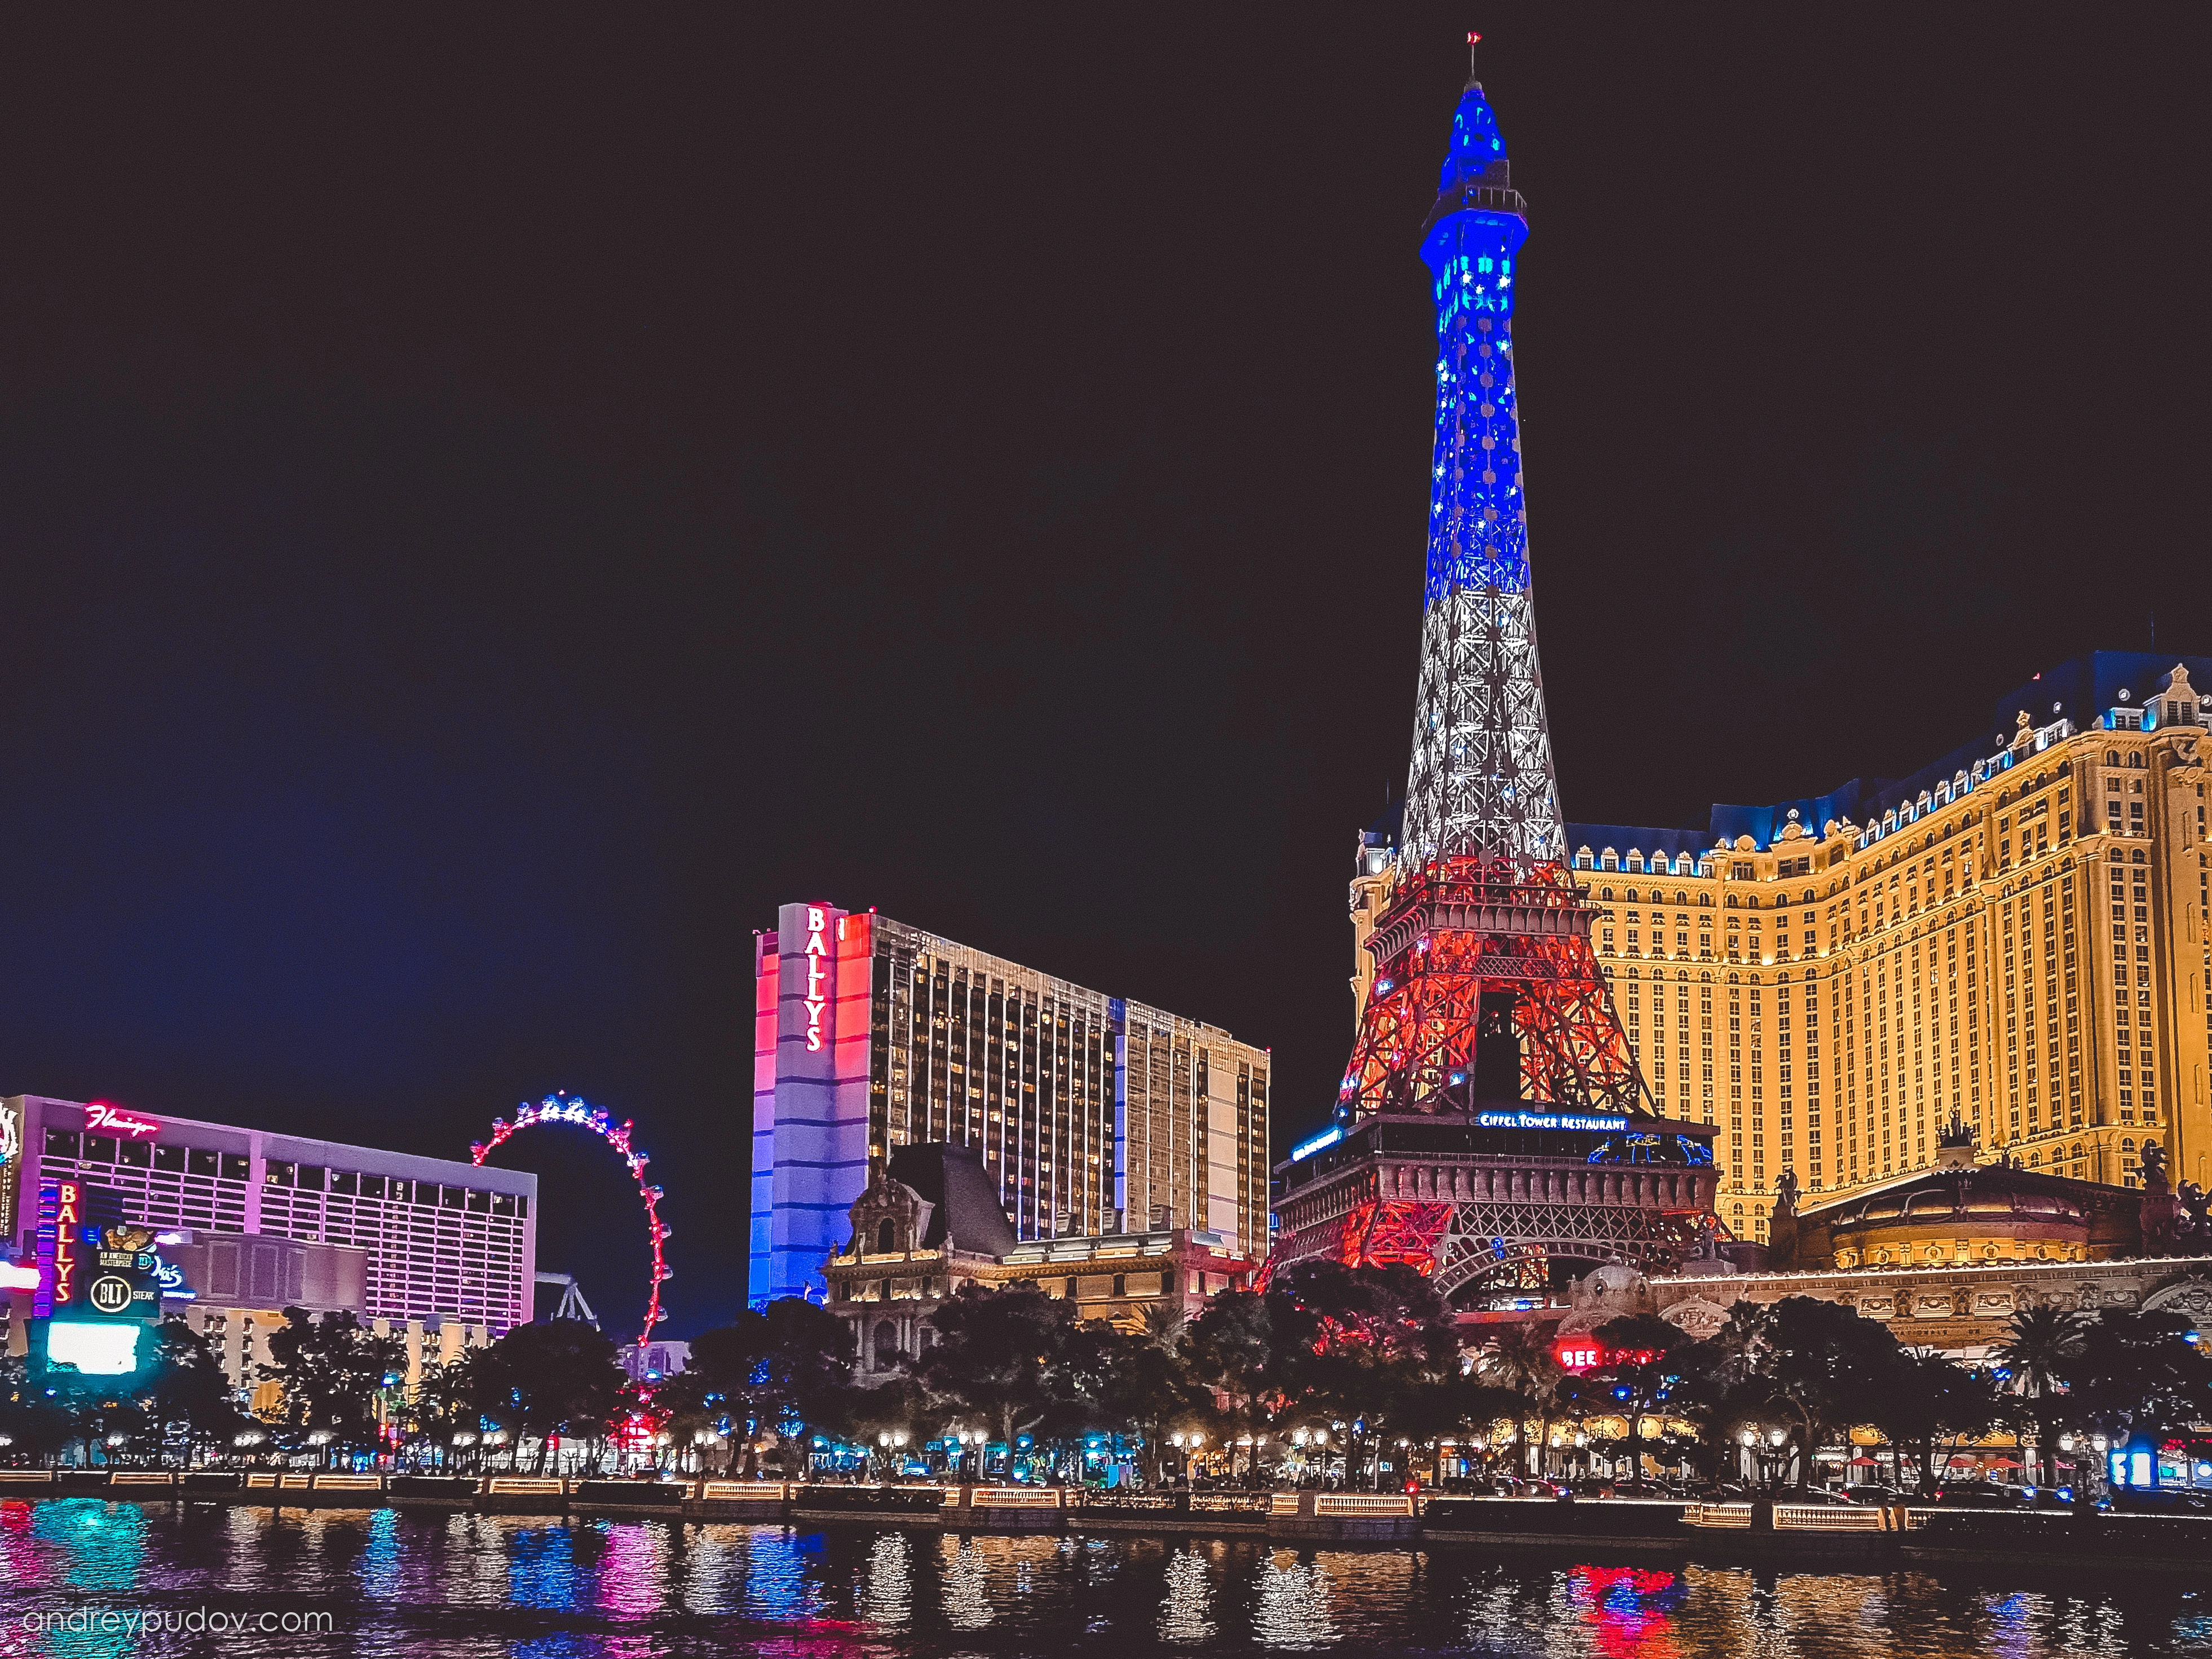 Paris Las Vegas

Paris Las Vegas is a casino hotel on the Las Vegas Strip in Paradise. It is owned and operated by Caesars Entertainment and has a 95,263 square-foot casino with over 1,700 slot machines.